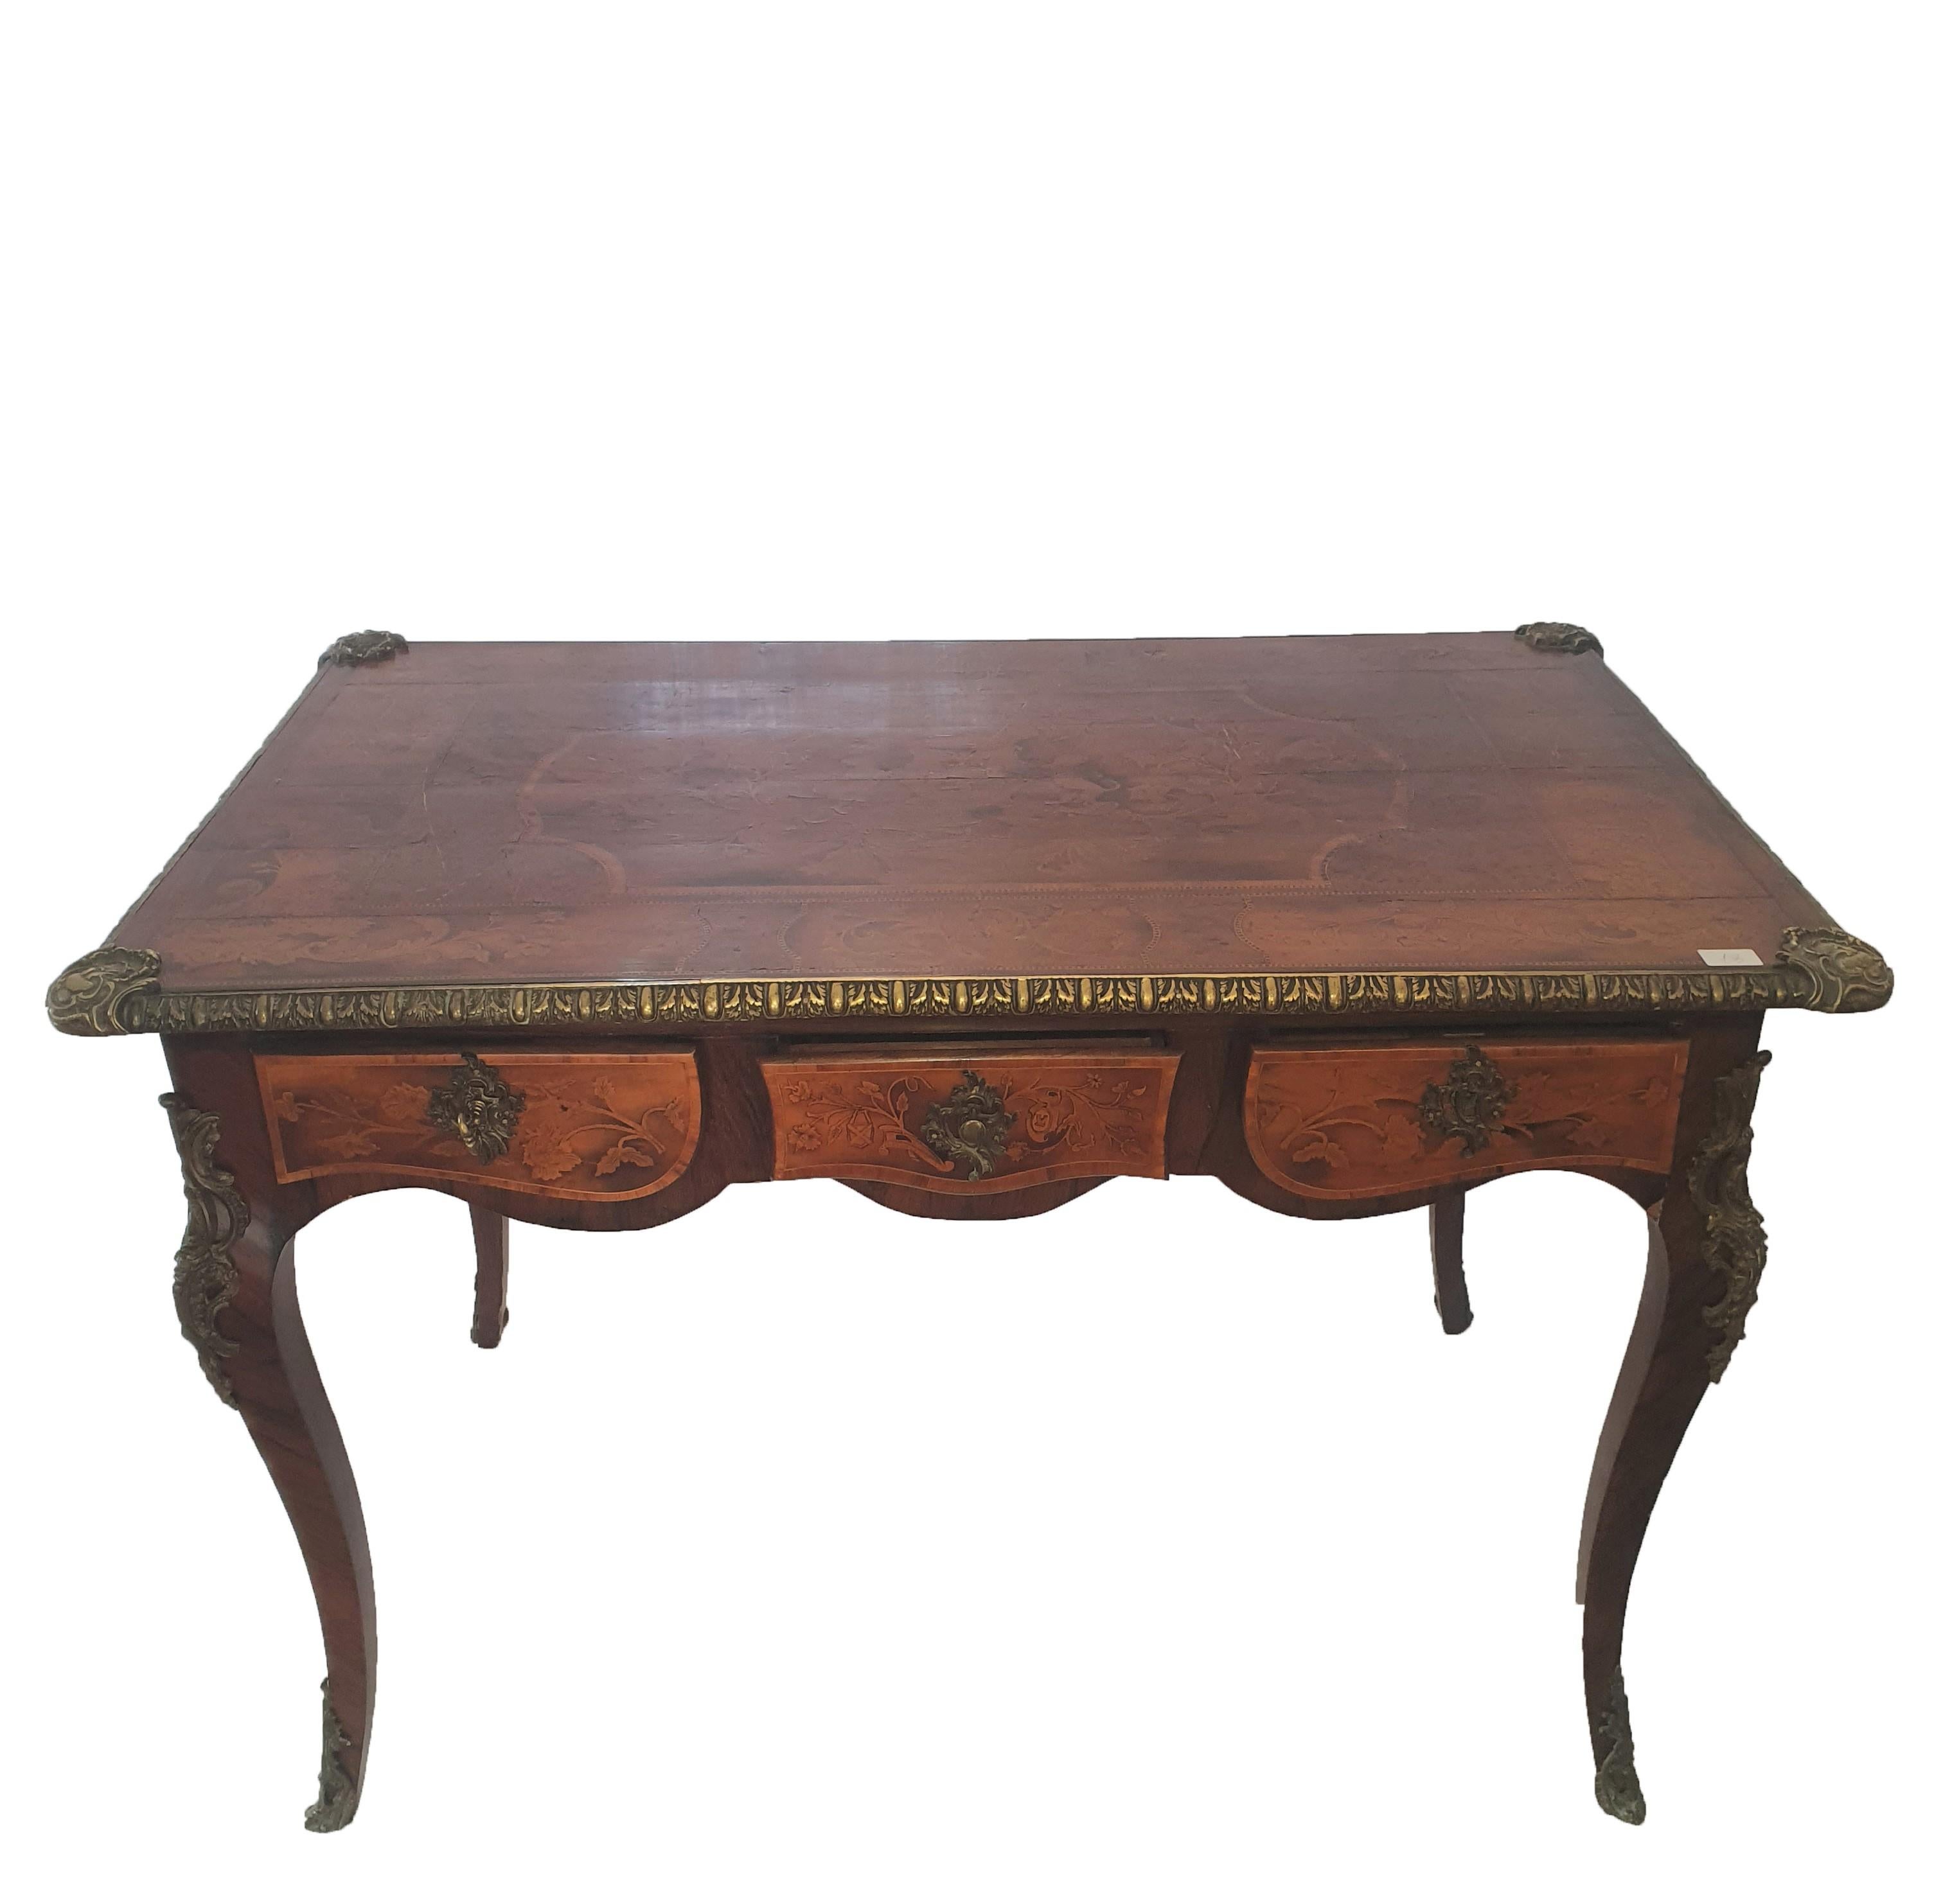 Elegant walnut desk, finely inlaid with fruit wood. Desk from the center, as it has three drawers on both sides, three fake, three in the front that open. Applications in gilded bronze adorn the desk.